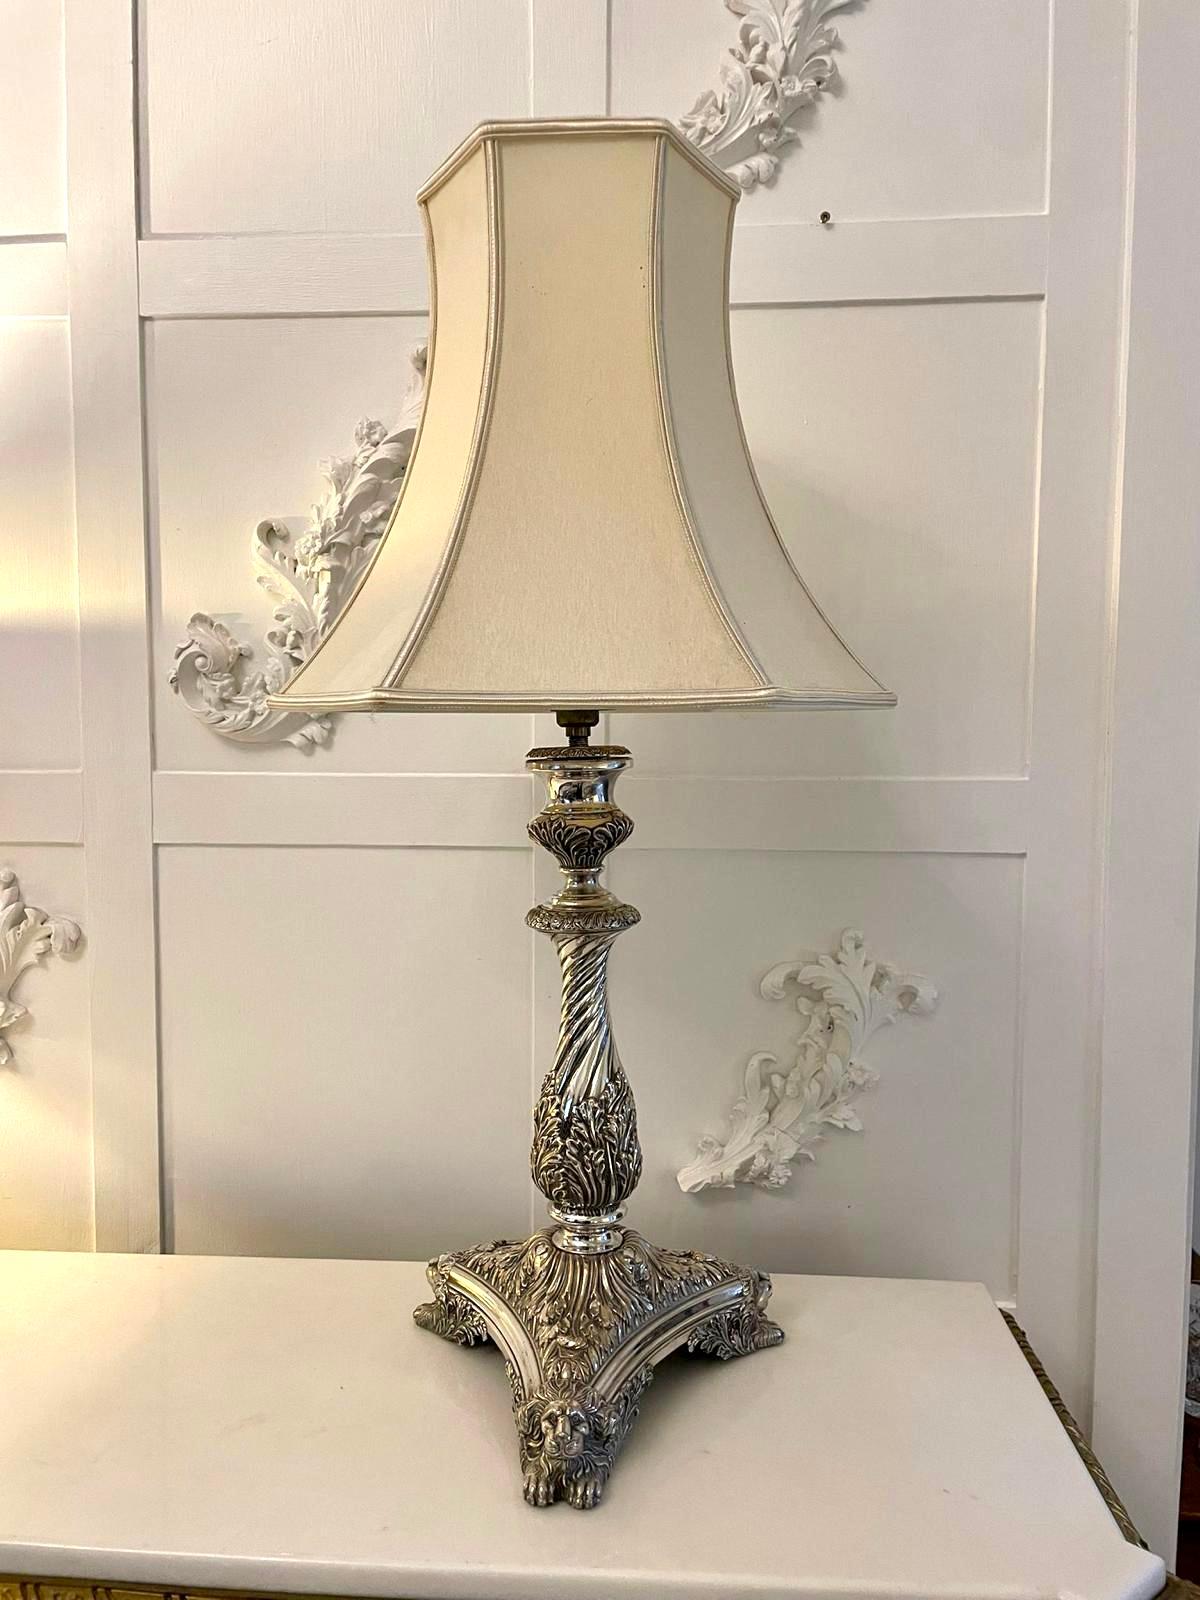 Outstanding quality antique Victorian ornate silver plated table lamp having a pretty shaped ornate column standing on an attractive shaped platform base with lions heads and paw feet. Shades not included.

A splendid example boasting a fabulous